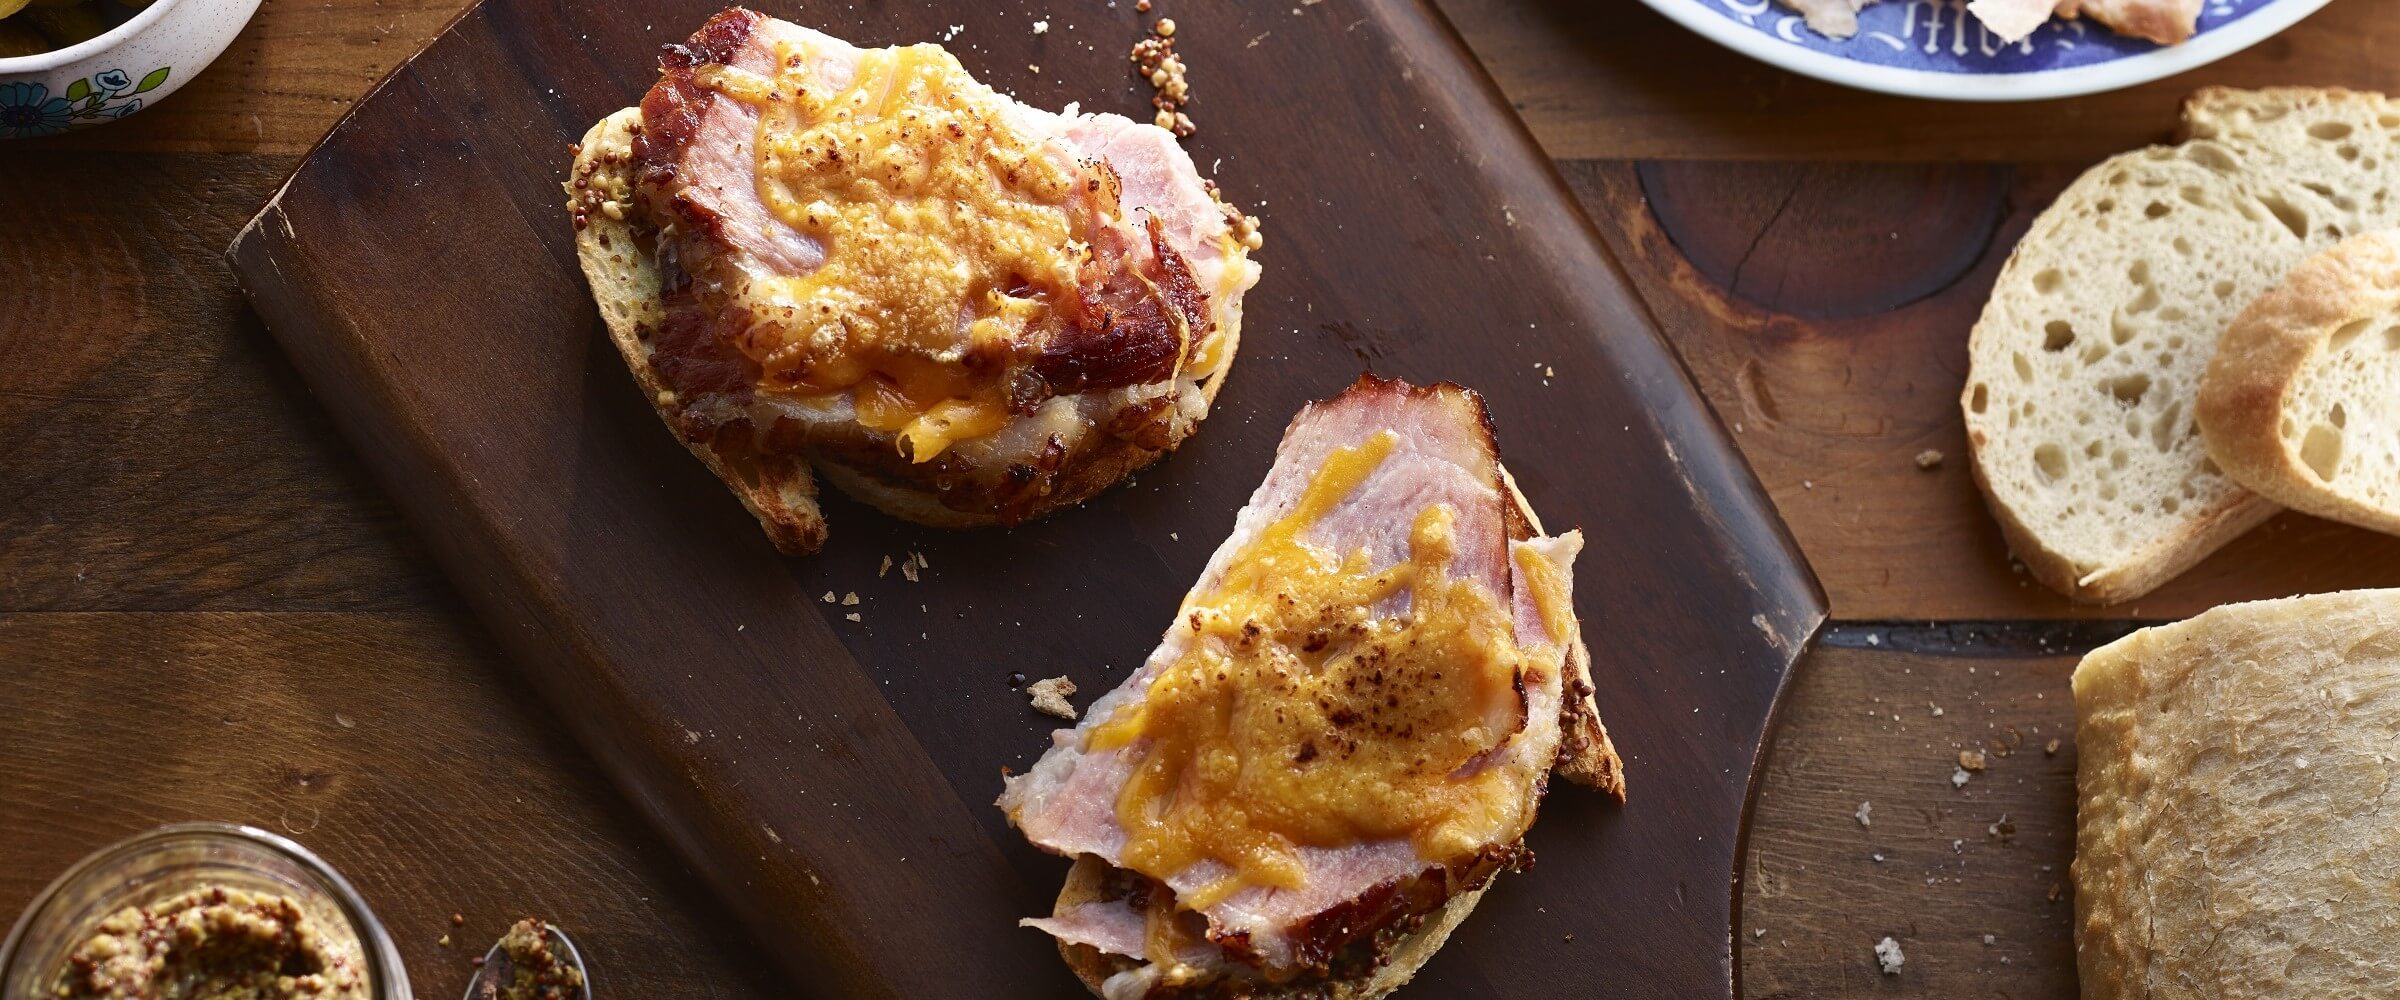 open faced grilled ham and cheese sandwich on wood board